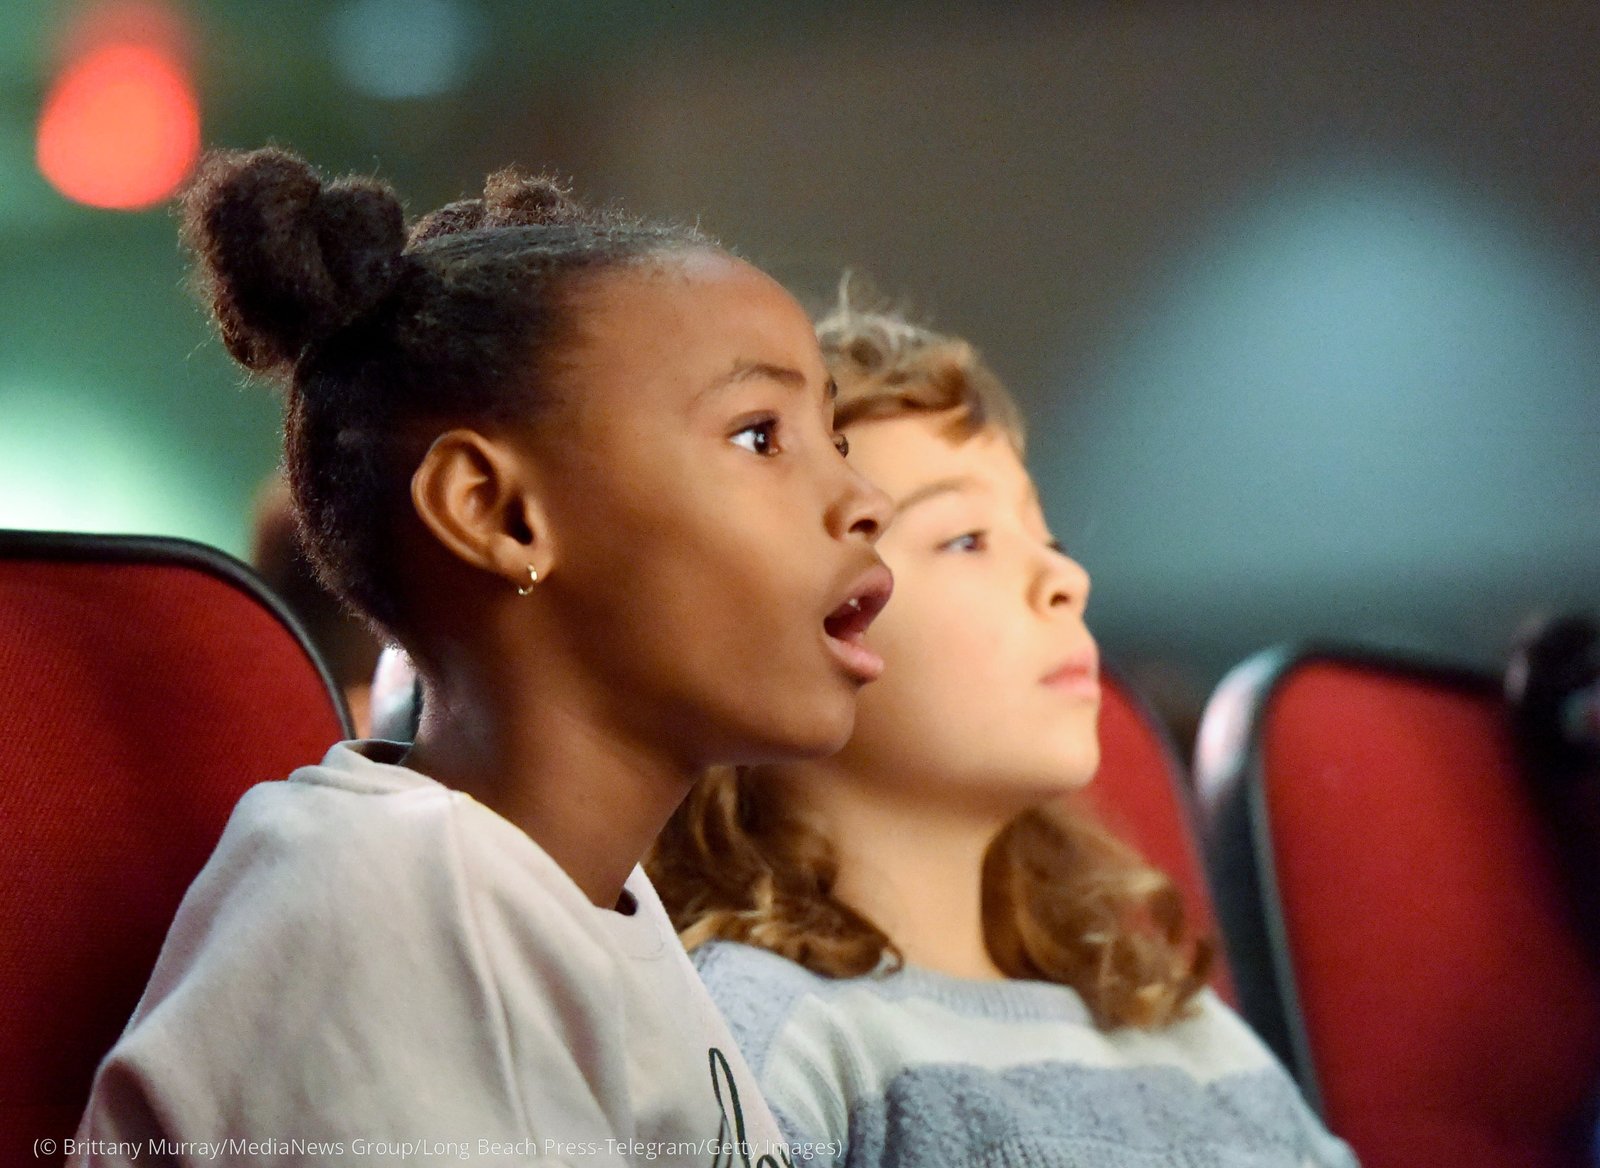 Two girls sit in a theater and look ahead (© Brittany Murray/MediaNews Group/Long Beach Press-Telegram/Getty Images)